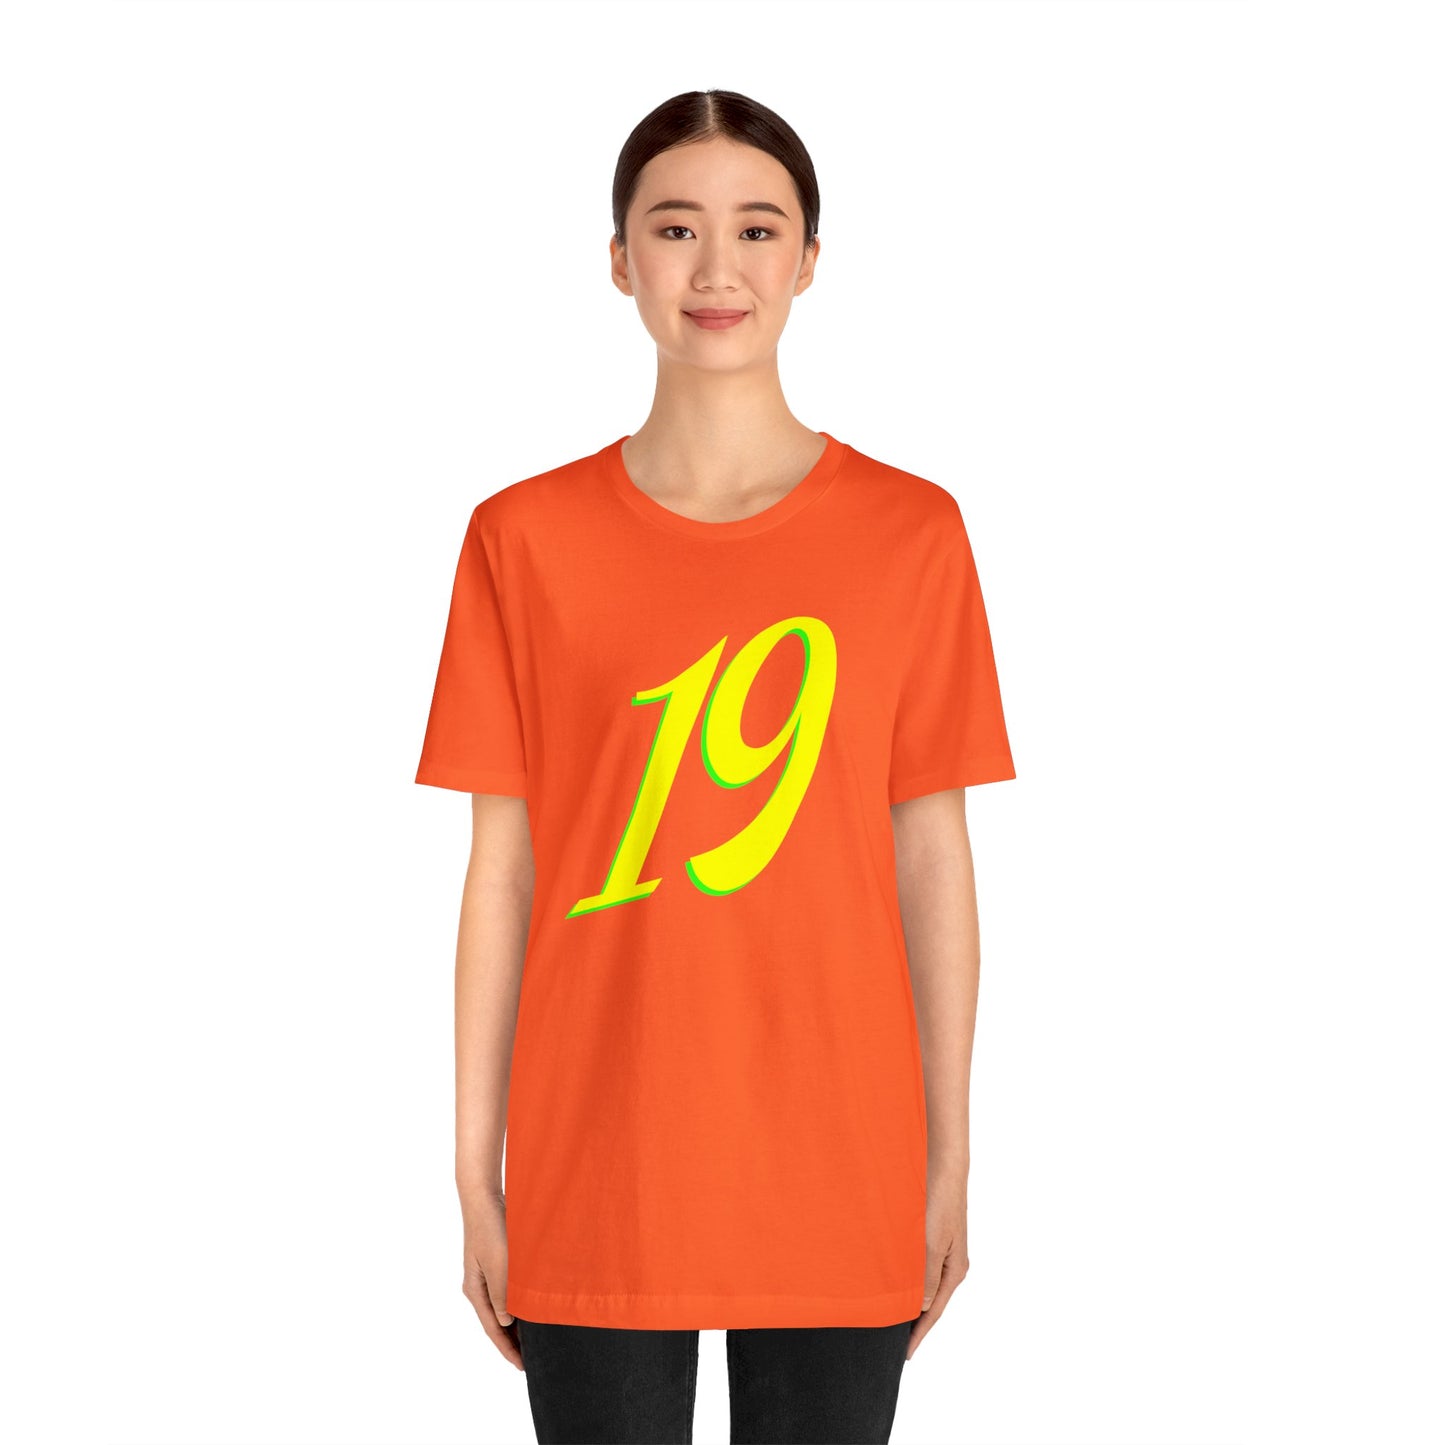 Number 19 Design - Soft Cotton Tee for birthdays and celebrations, Gift for friends and family, Multiple Options by clothezy.com in Black Size Medium - Buy Now